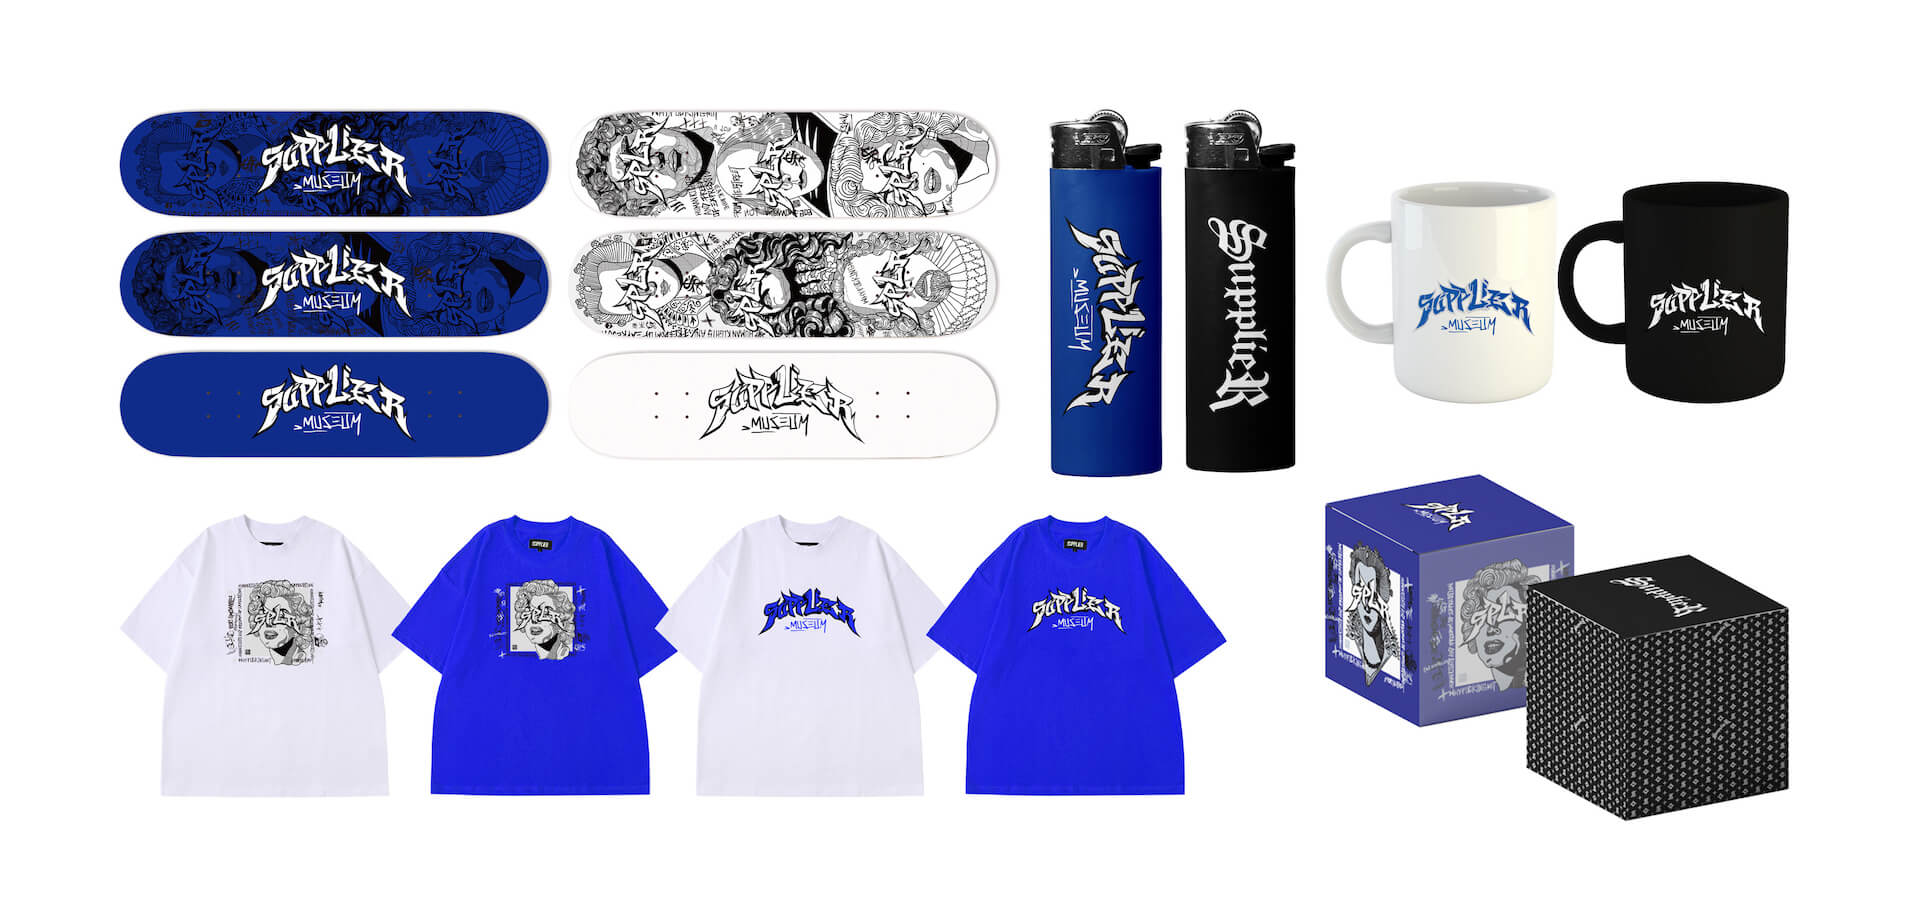 SUPPLIERのPOP UP STOREがatmosで開催｜「CROSS LOGO COLLECTION」のアイテムが詰まったLIMITED BOXが数量限定で発売 life_220413_supplier-220415_04